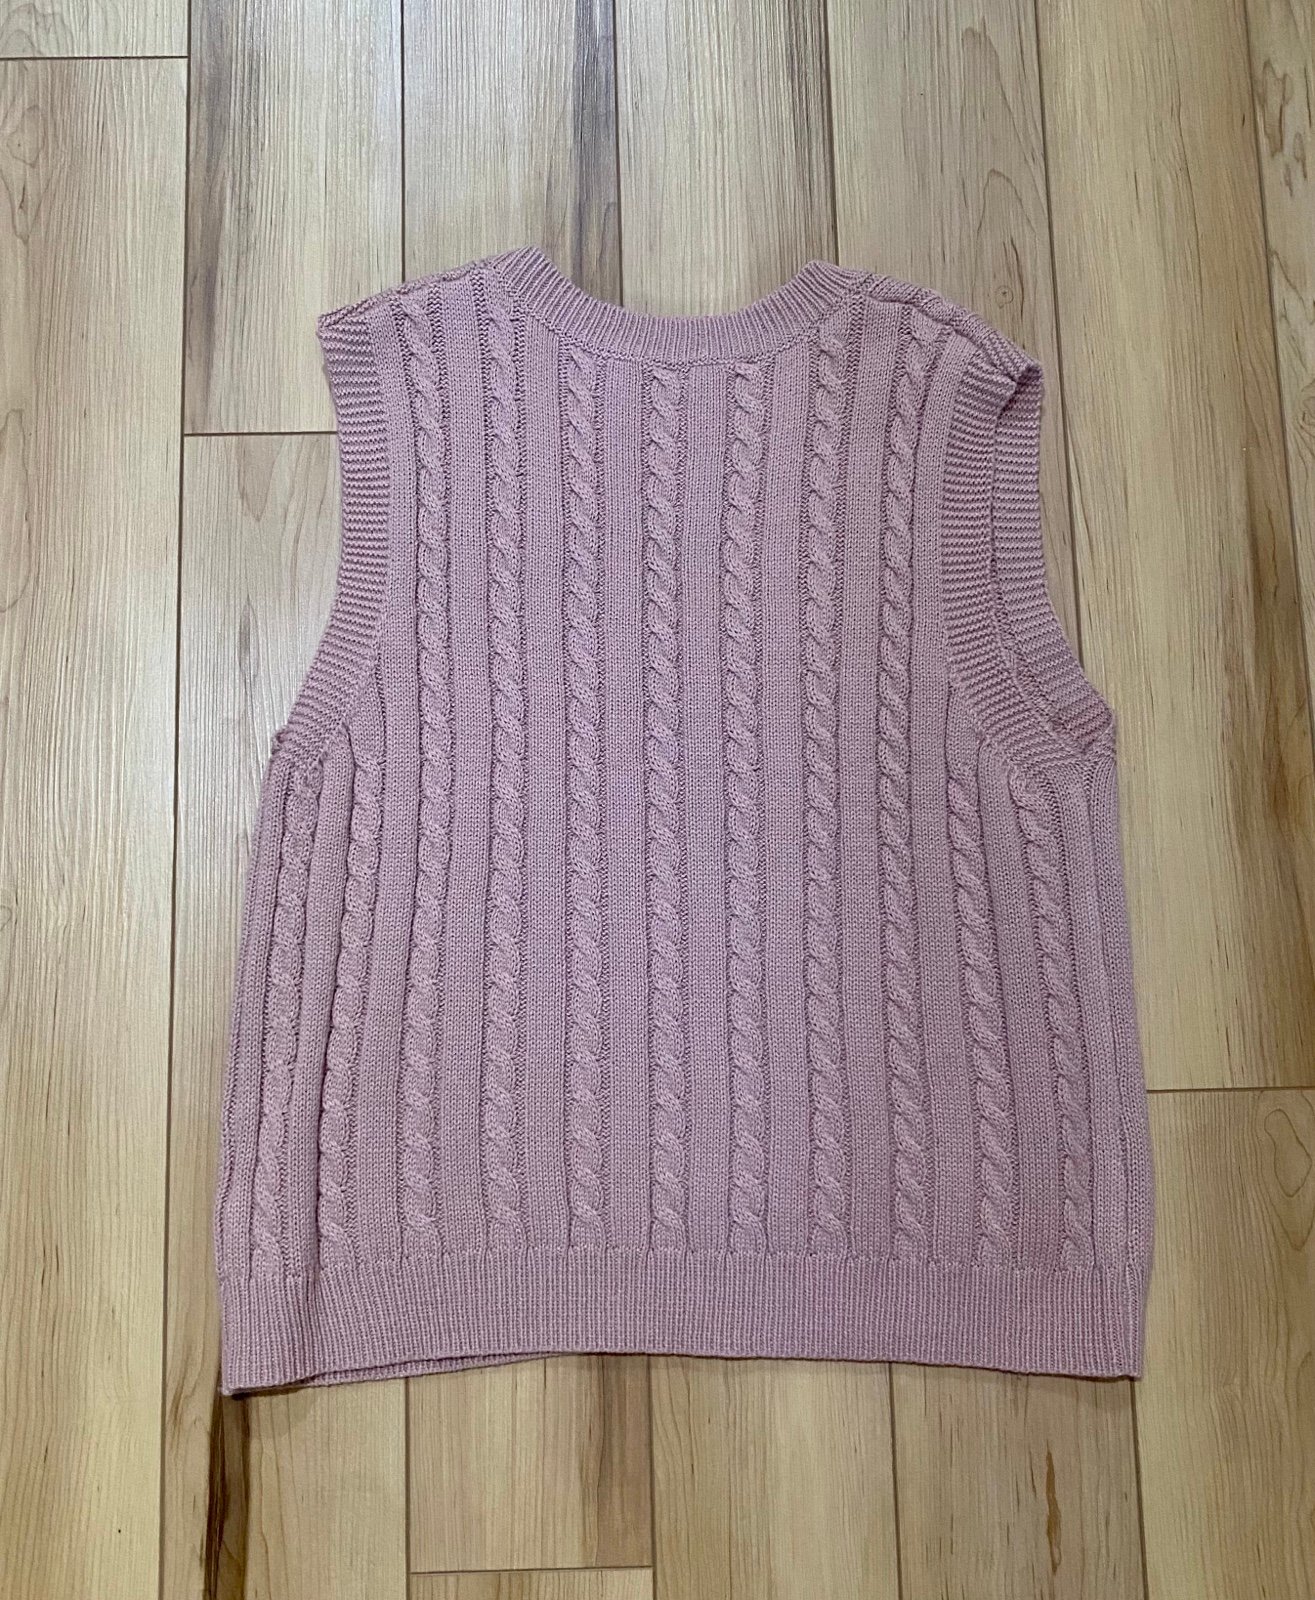 reasonable price Women’s Pink Stretch Cable Knit Sweater Vest Size Large nXOtql45C US Outlet